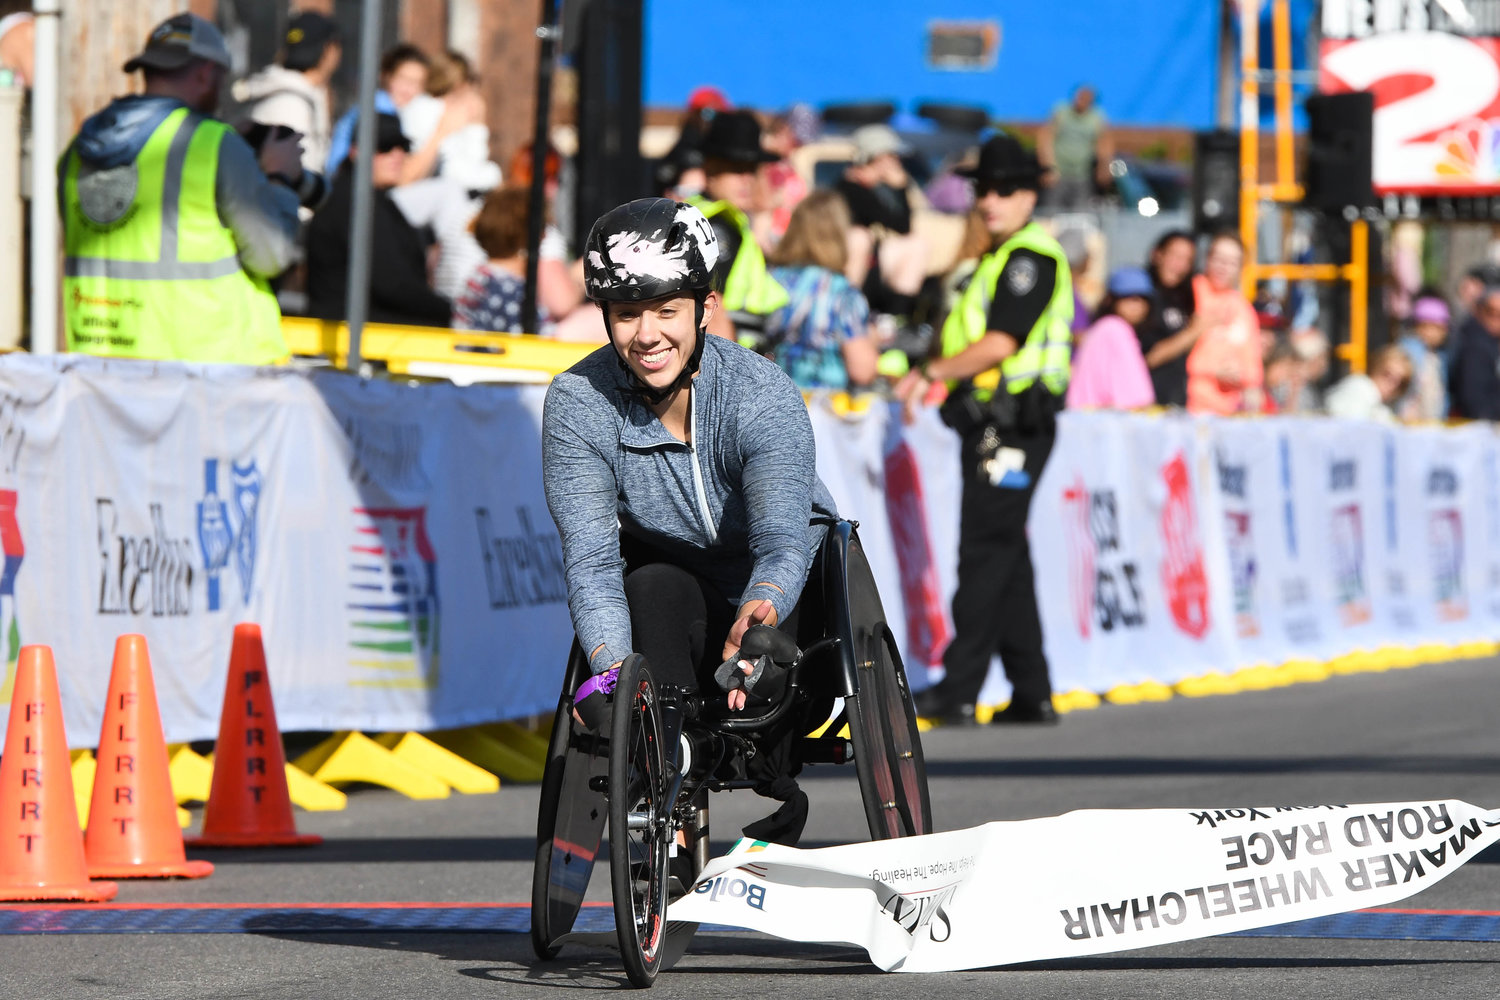 Jenna Fesemyer crosses the finish line with the best time among women competitors in the wheelchair 15K at the 45th Boilermaker Road Race on Sunday in Utica. It was her second time winning the women's race, three years after her first.